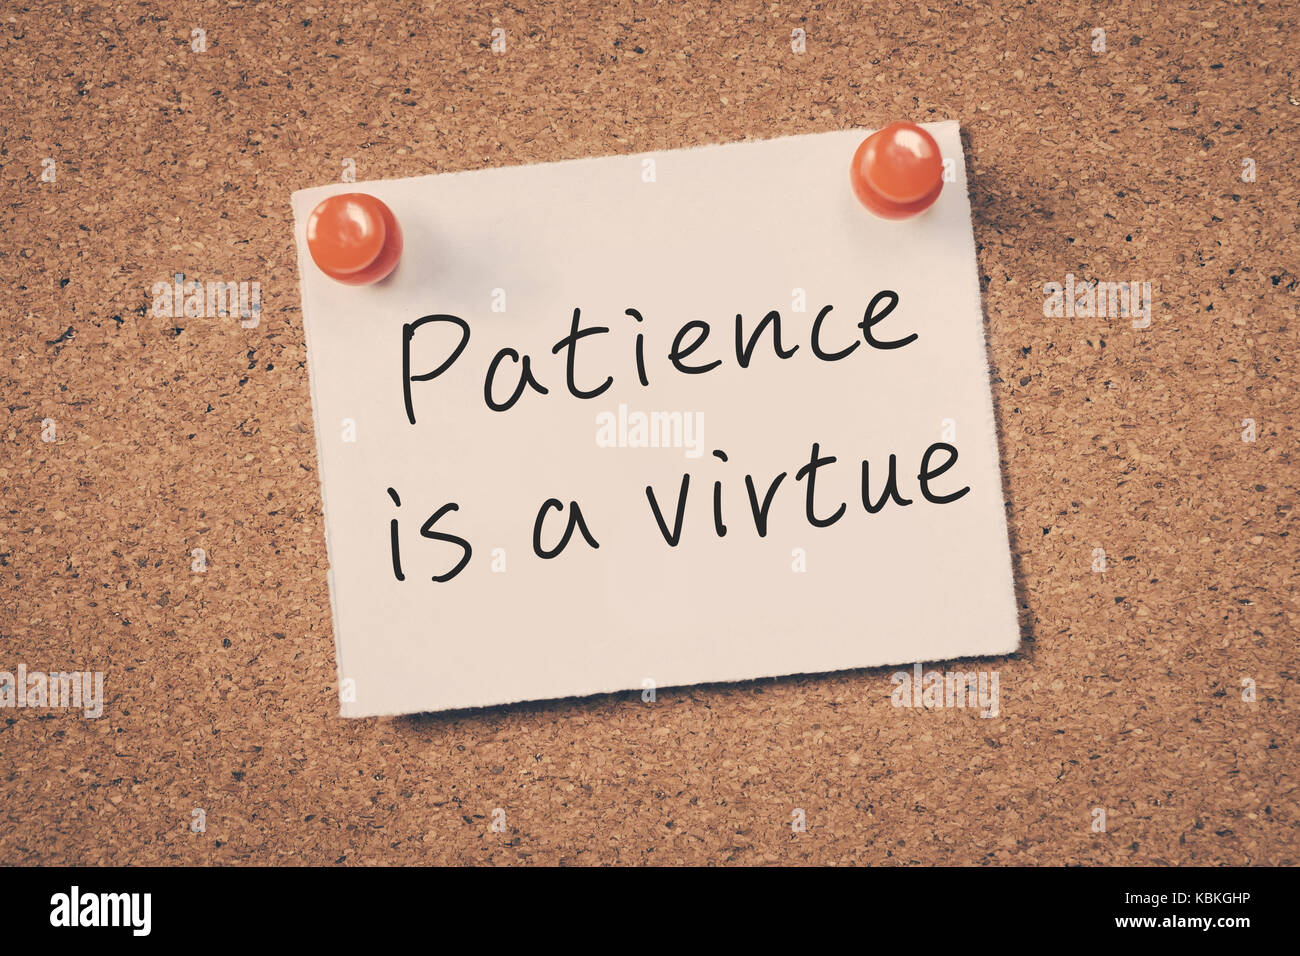 patience is a virtue Stock Photo